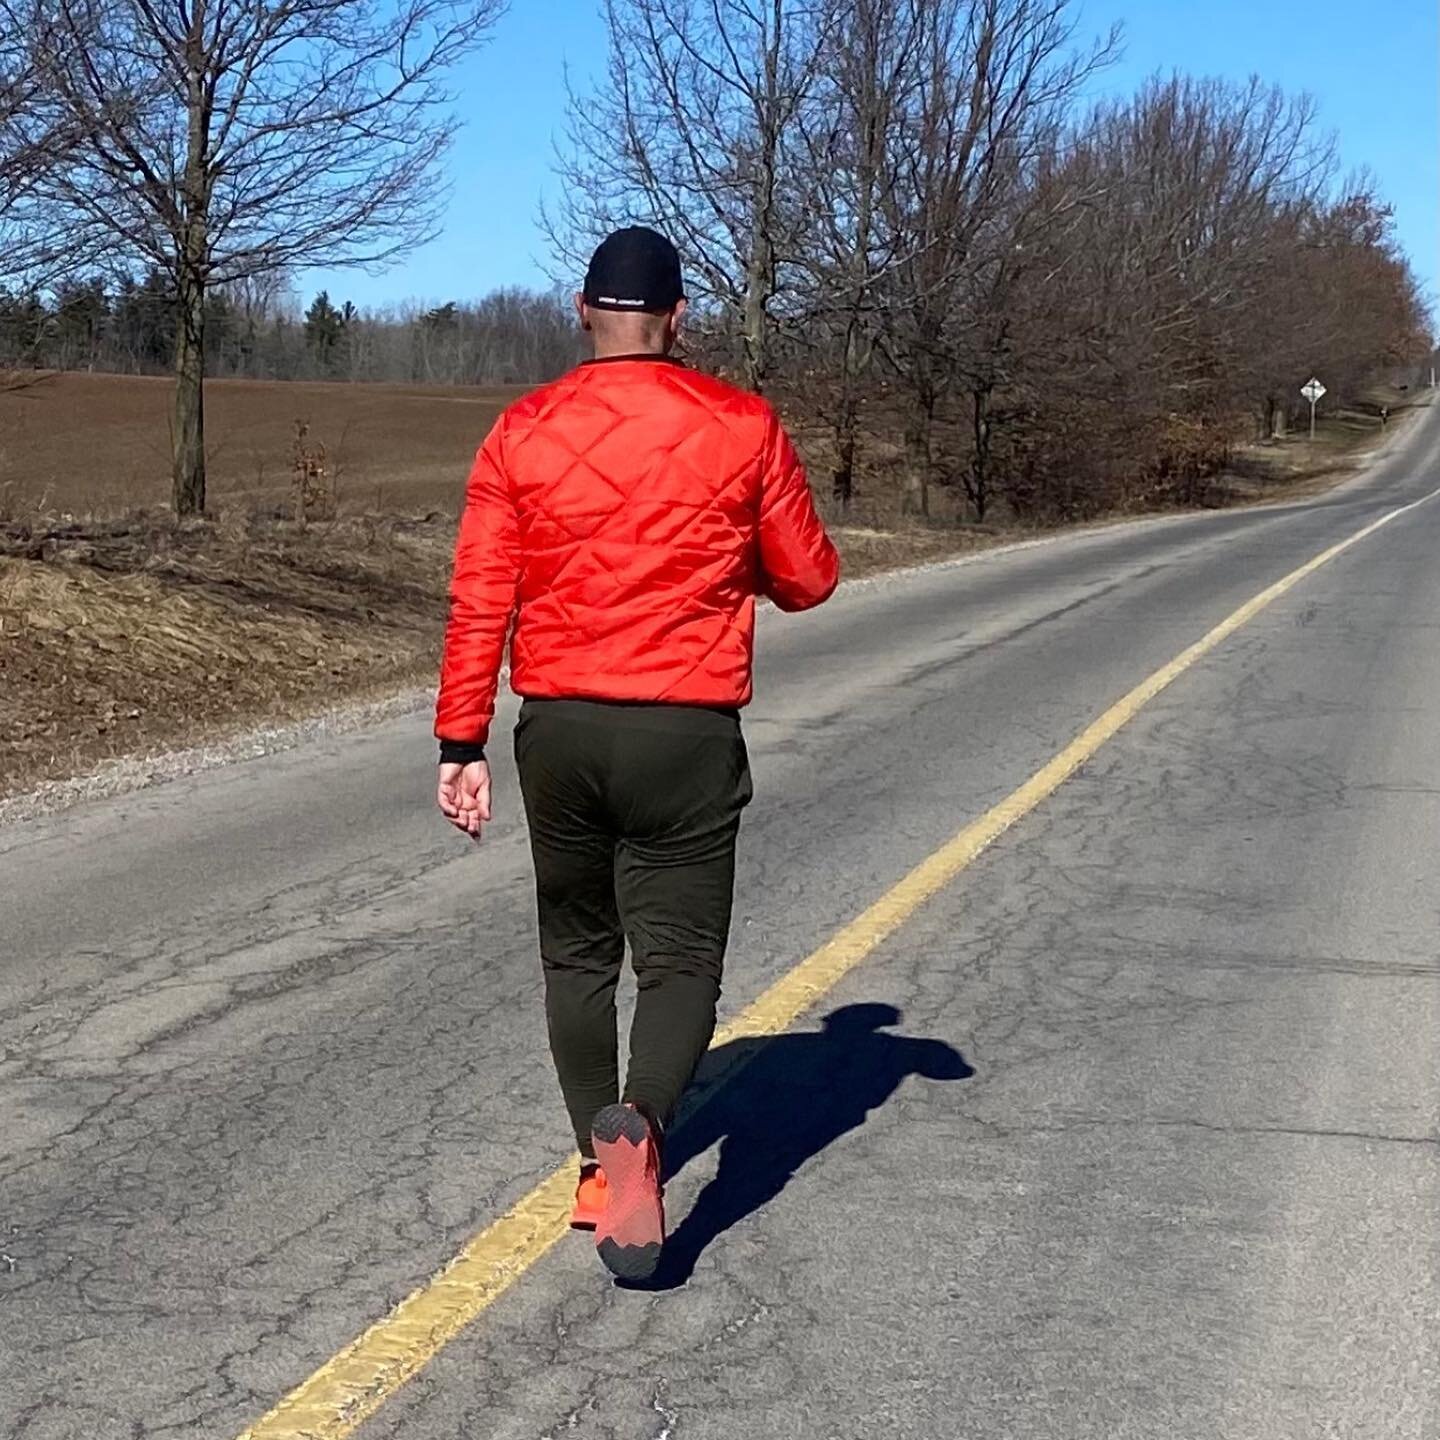 Putting in the work 

Early morning road work with my friend and walking partner @doncoxrealtor 
Finished 31.3 kilometers in 4.5 hours , 6.9 k&rsquo;s an hour , good pace and a beautiful sunny , fresh morning . Feeling energized 😀

Ramping up the ro